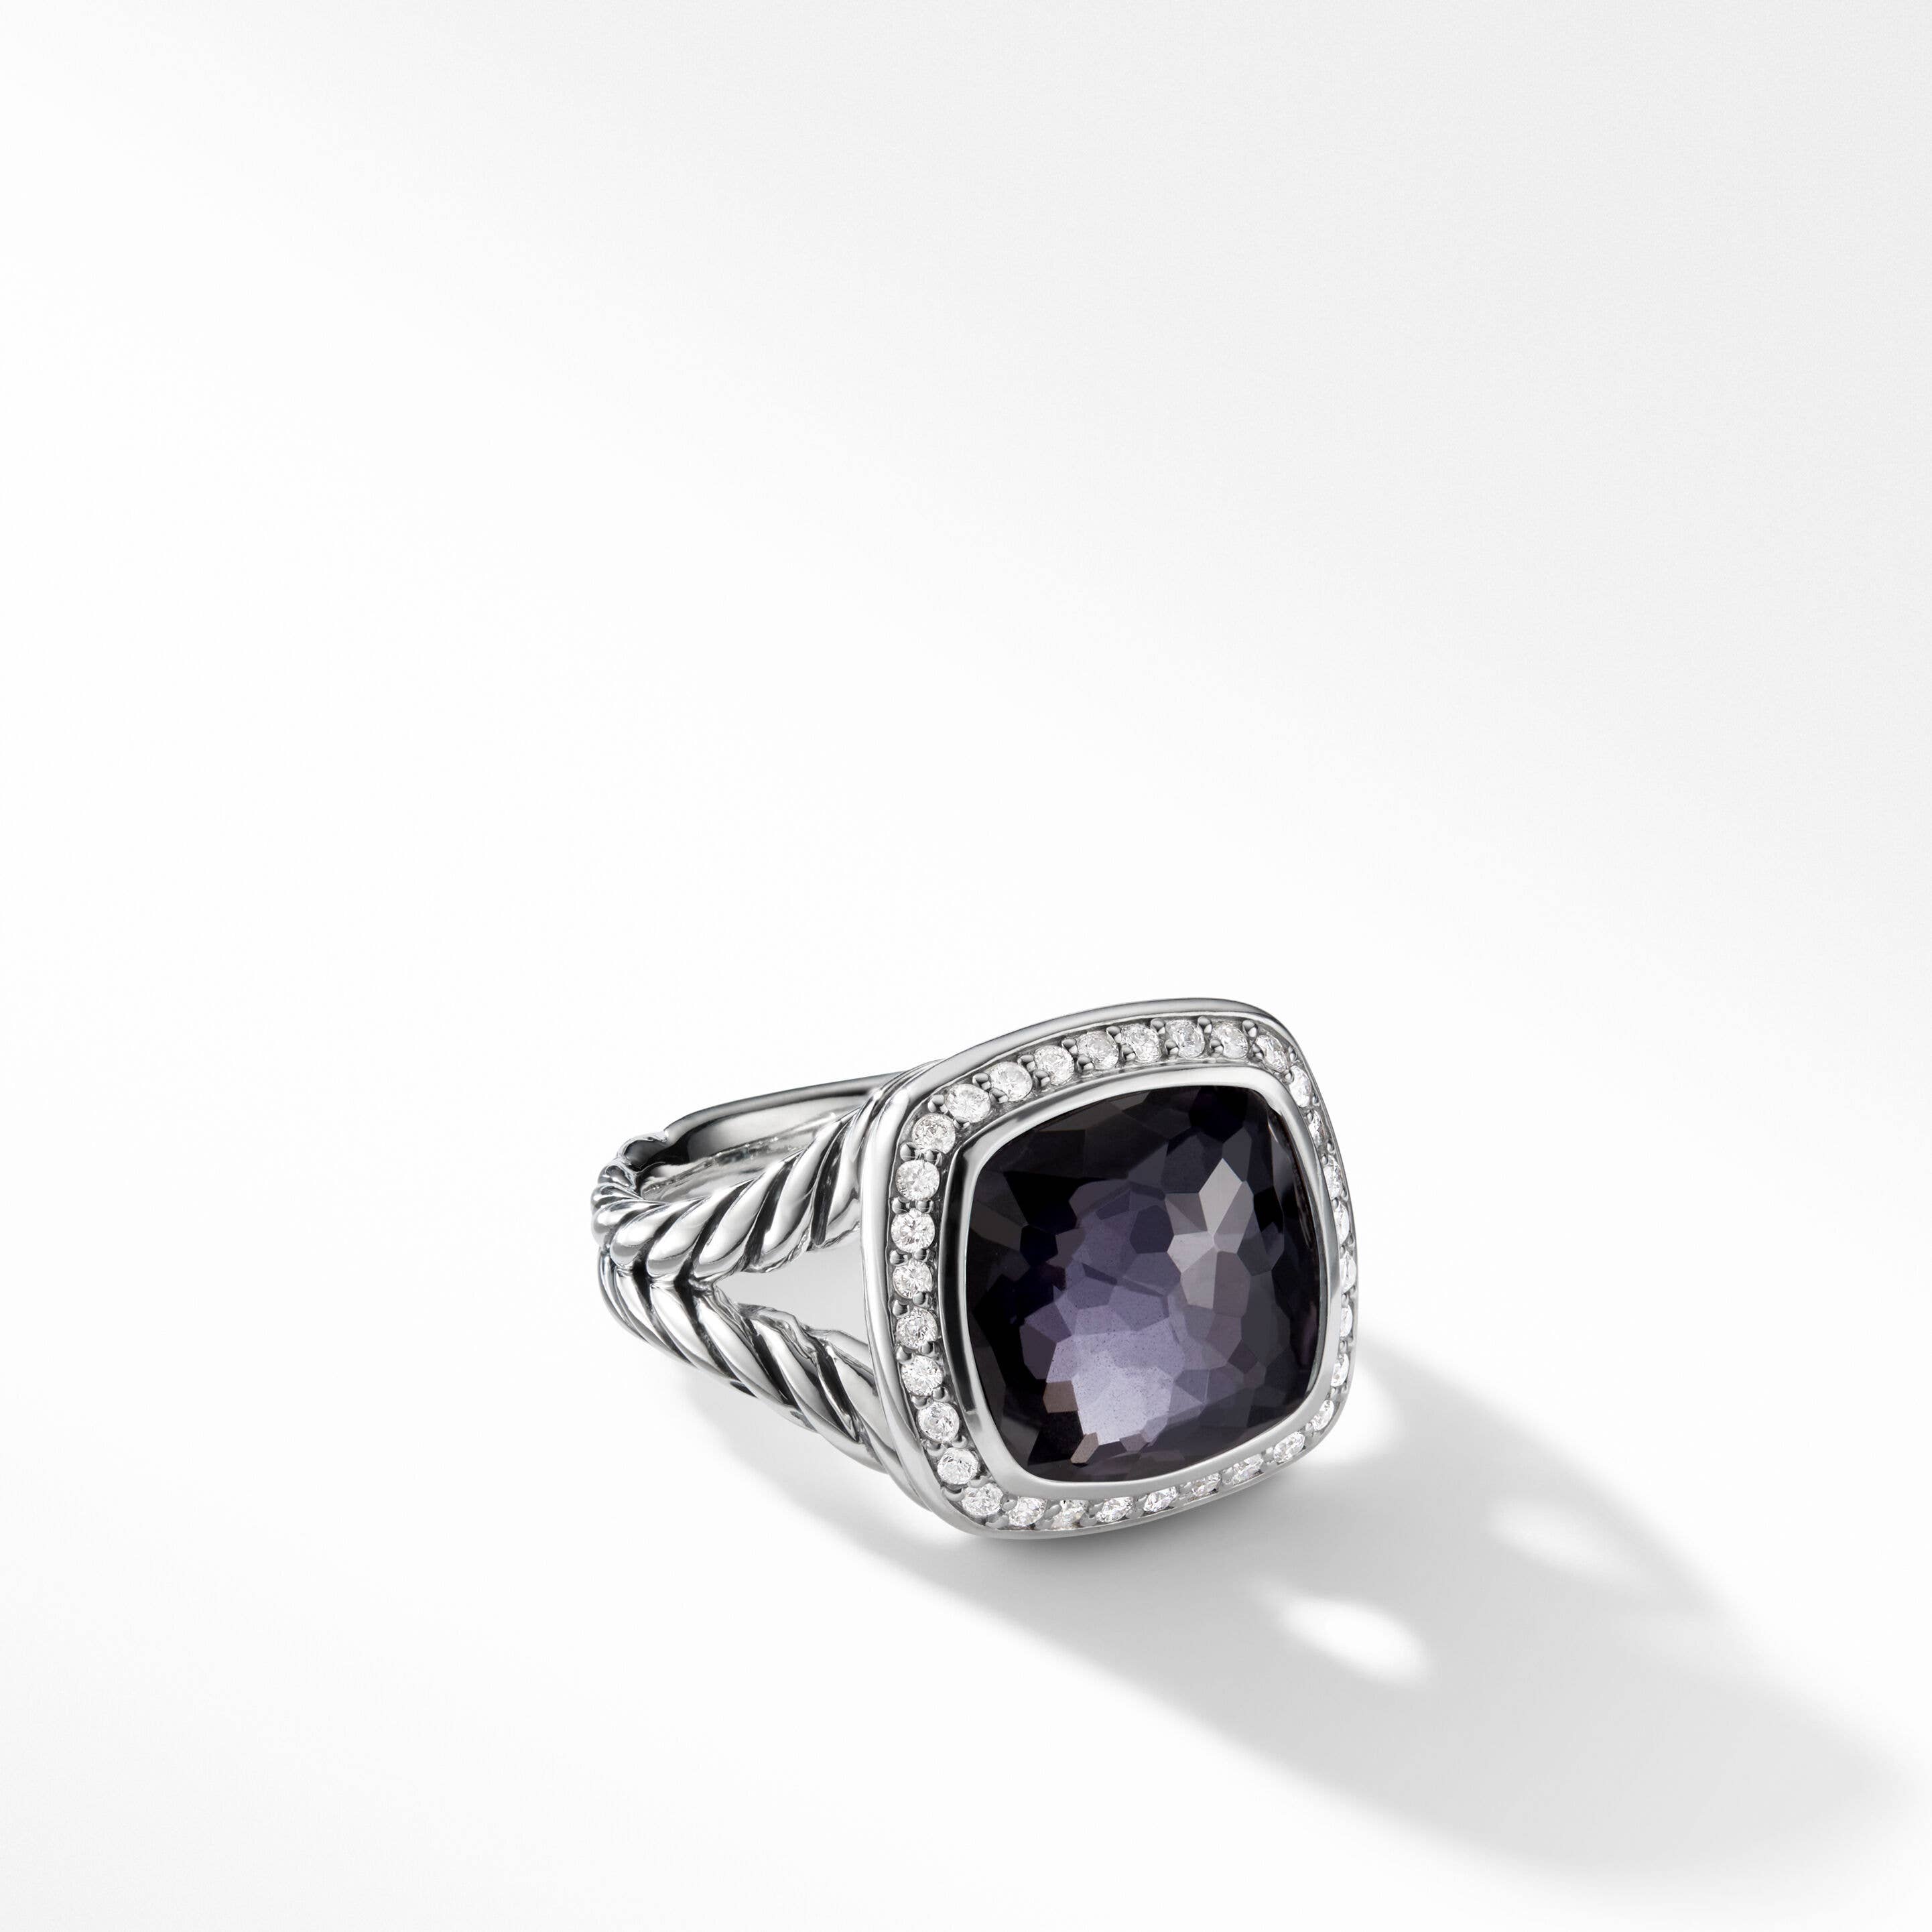 Albion® Ring in Sterling Silver with Black Orchid and Pavé Diamonds